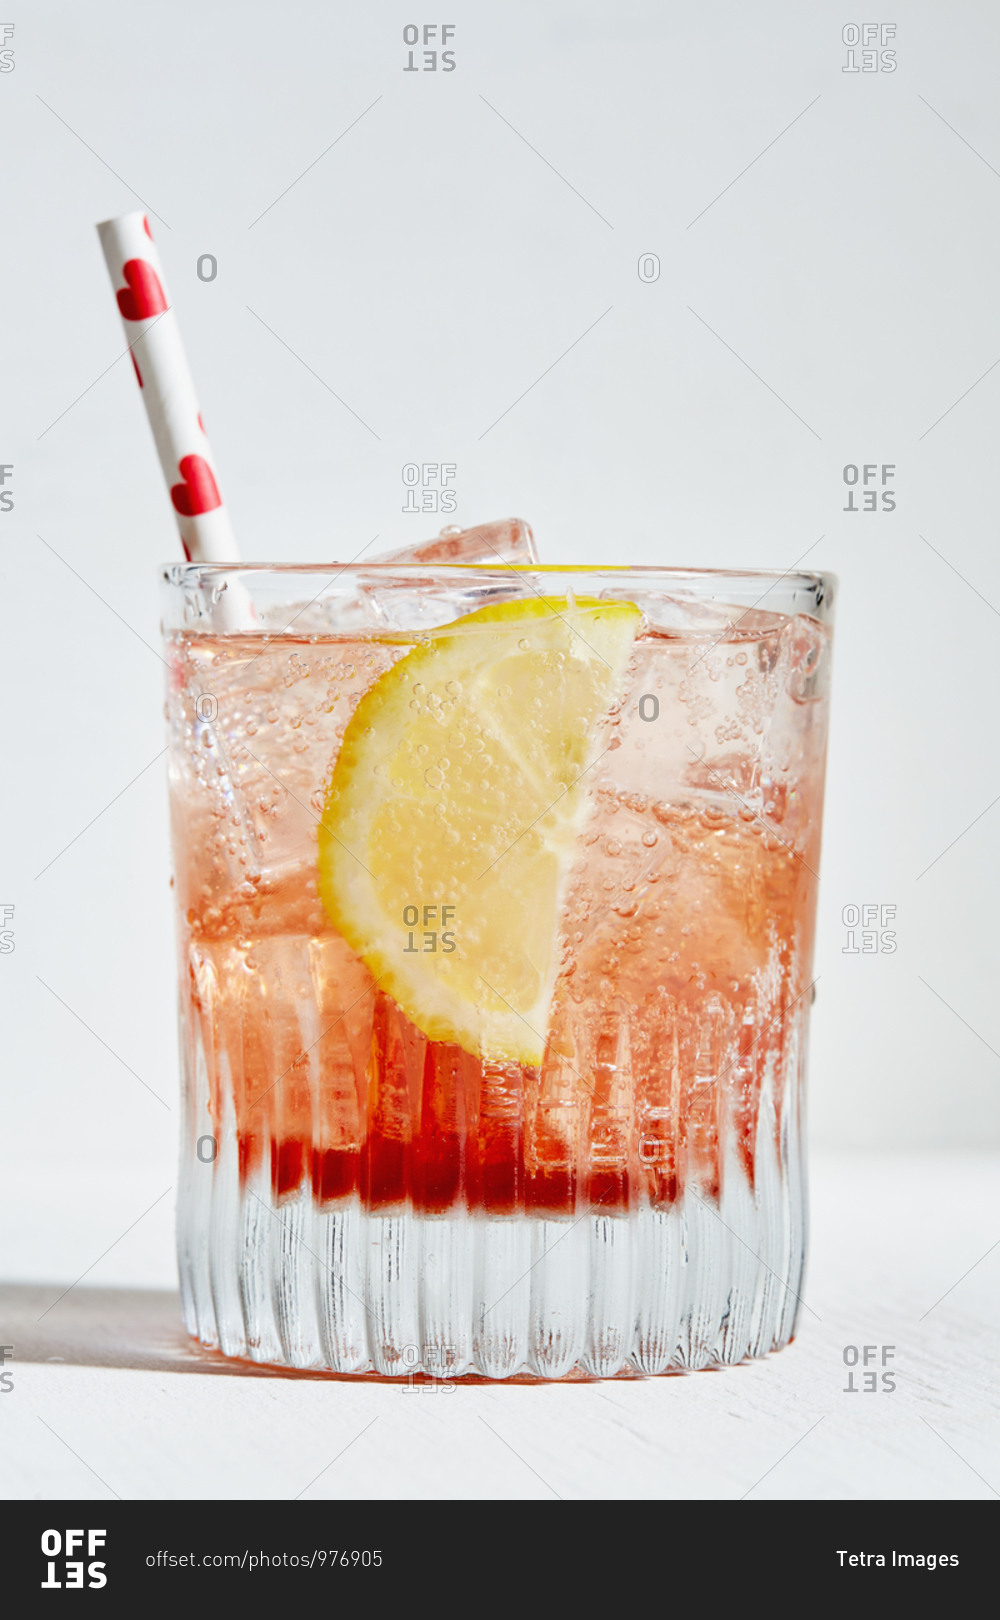 Aperol spritz with lemon and straw